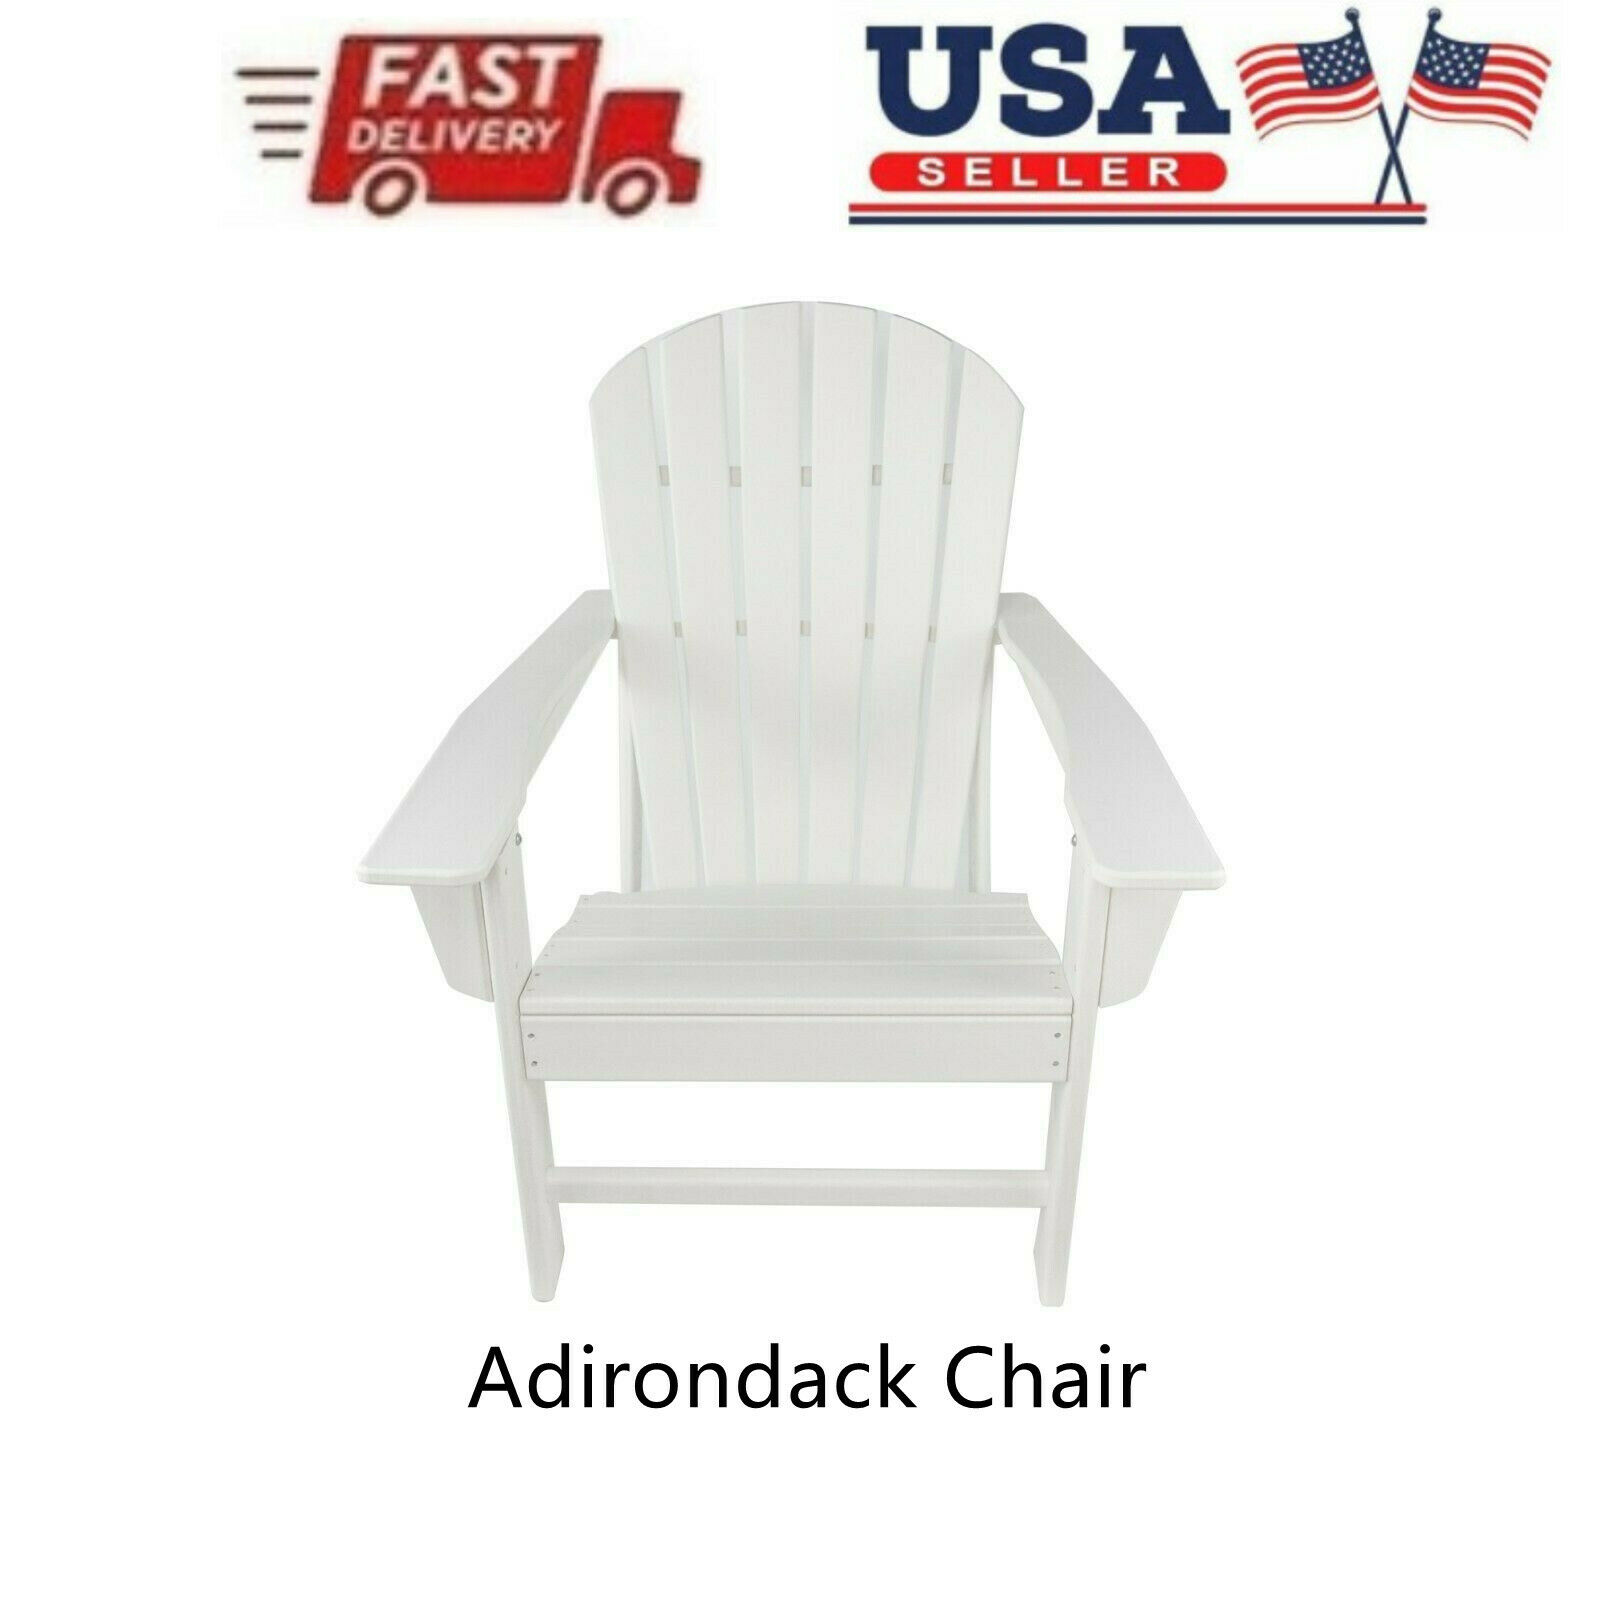 Folding Adirondack Chair Patio Chair Lawn Chair Outdoor 350 lbs Capacity Load Adirondack Chairs Weather Resistant for Patio Deck Garden 33.07*31.1*36.4" HDPE Resin Wood,White - image 2 of 9